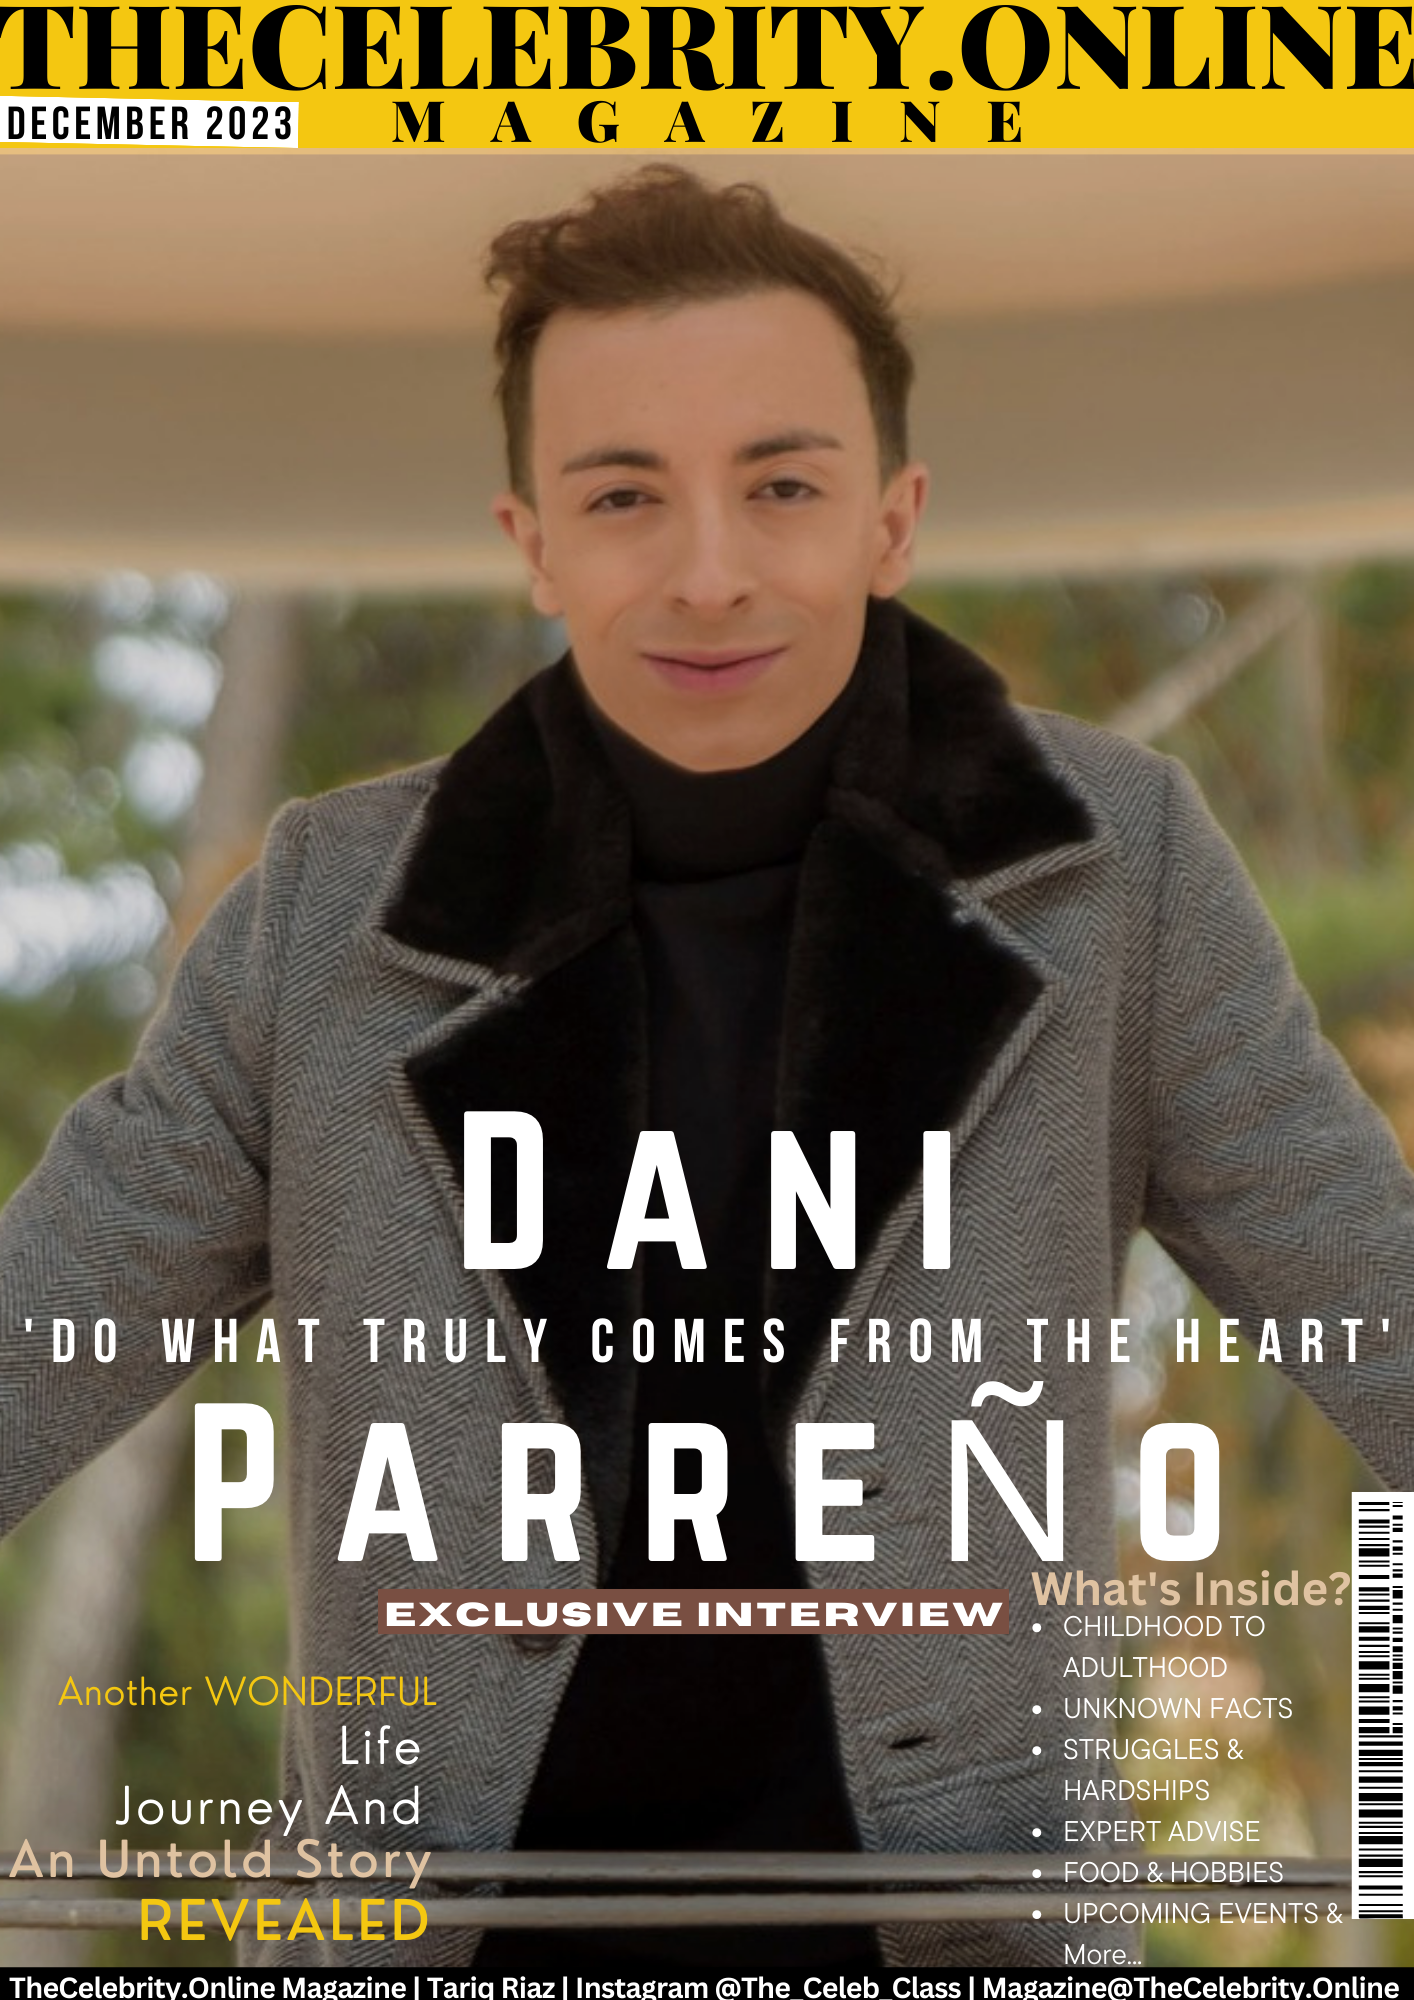 Dani Parreño Exclusive Interview – ‘Do What Truly Comes From The Heart’